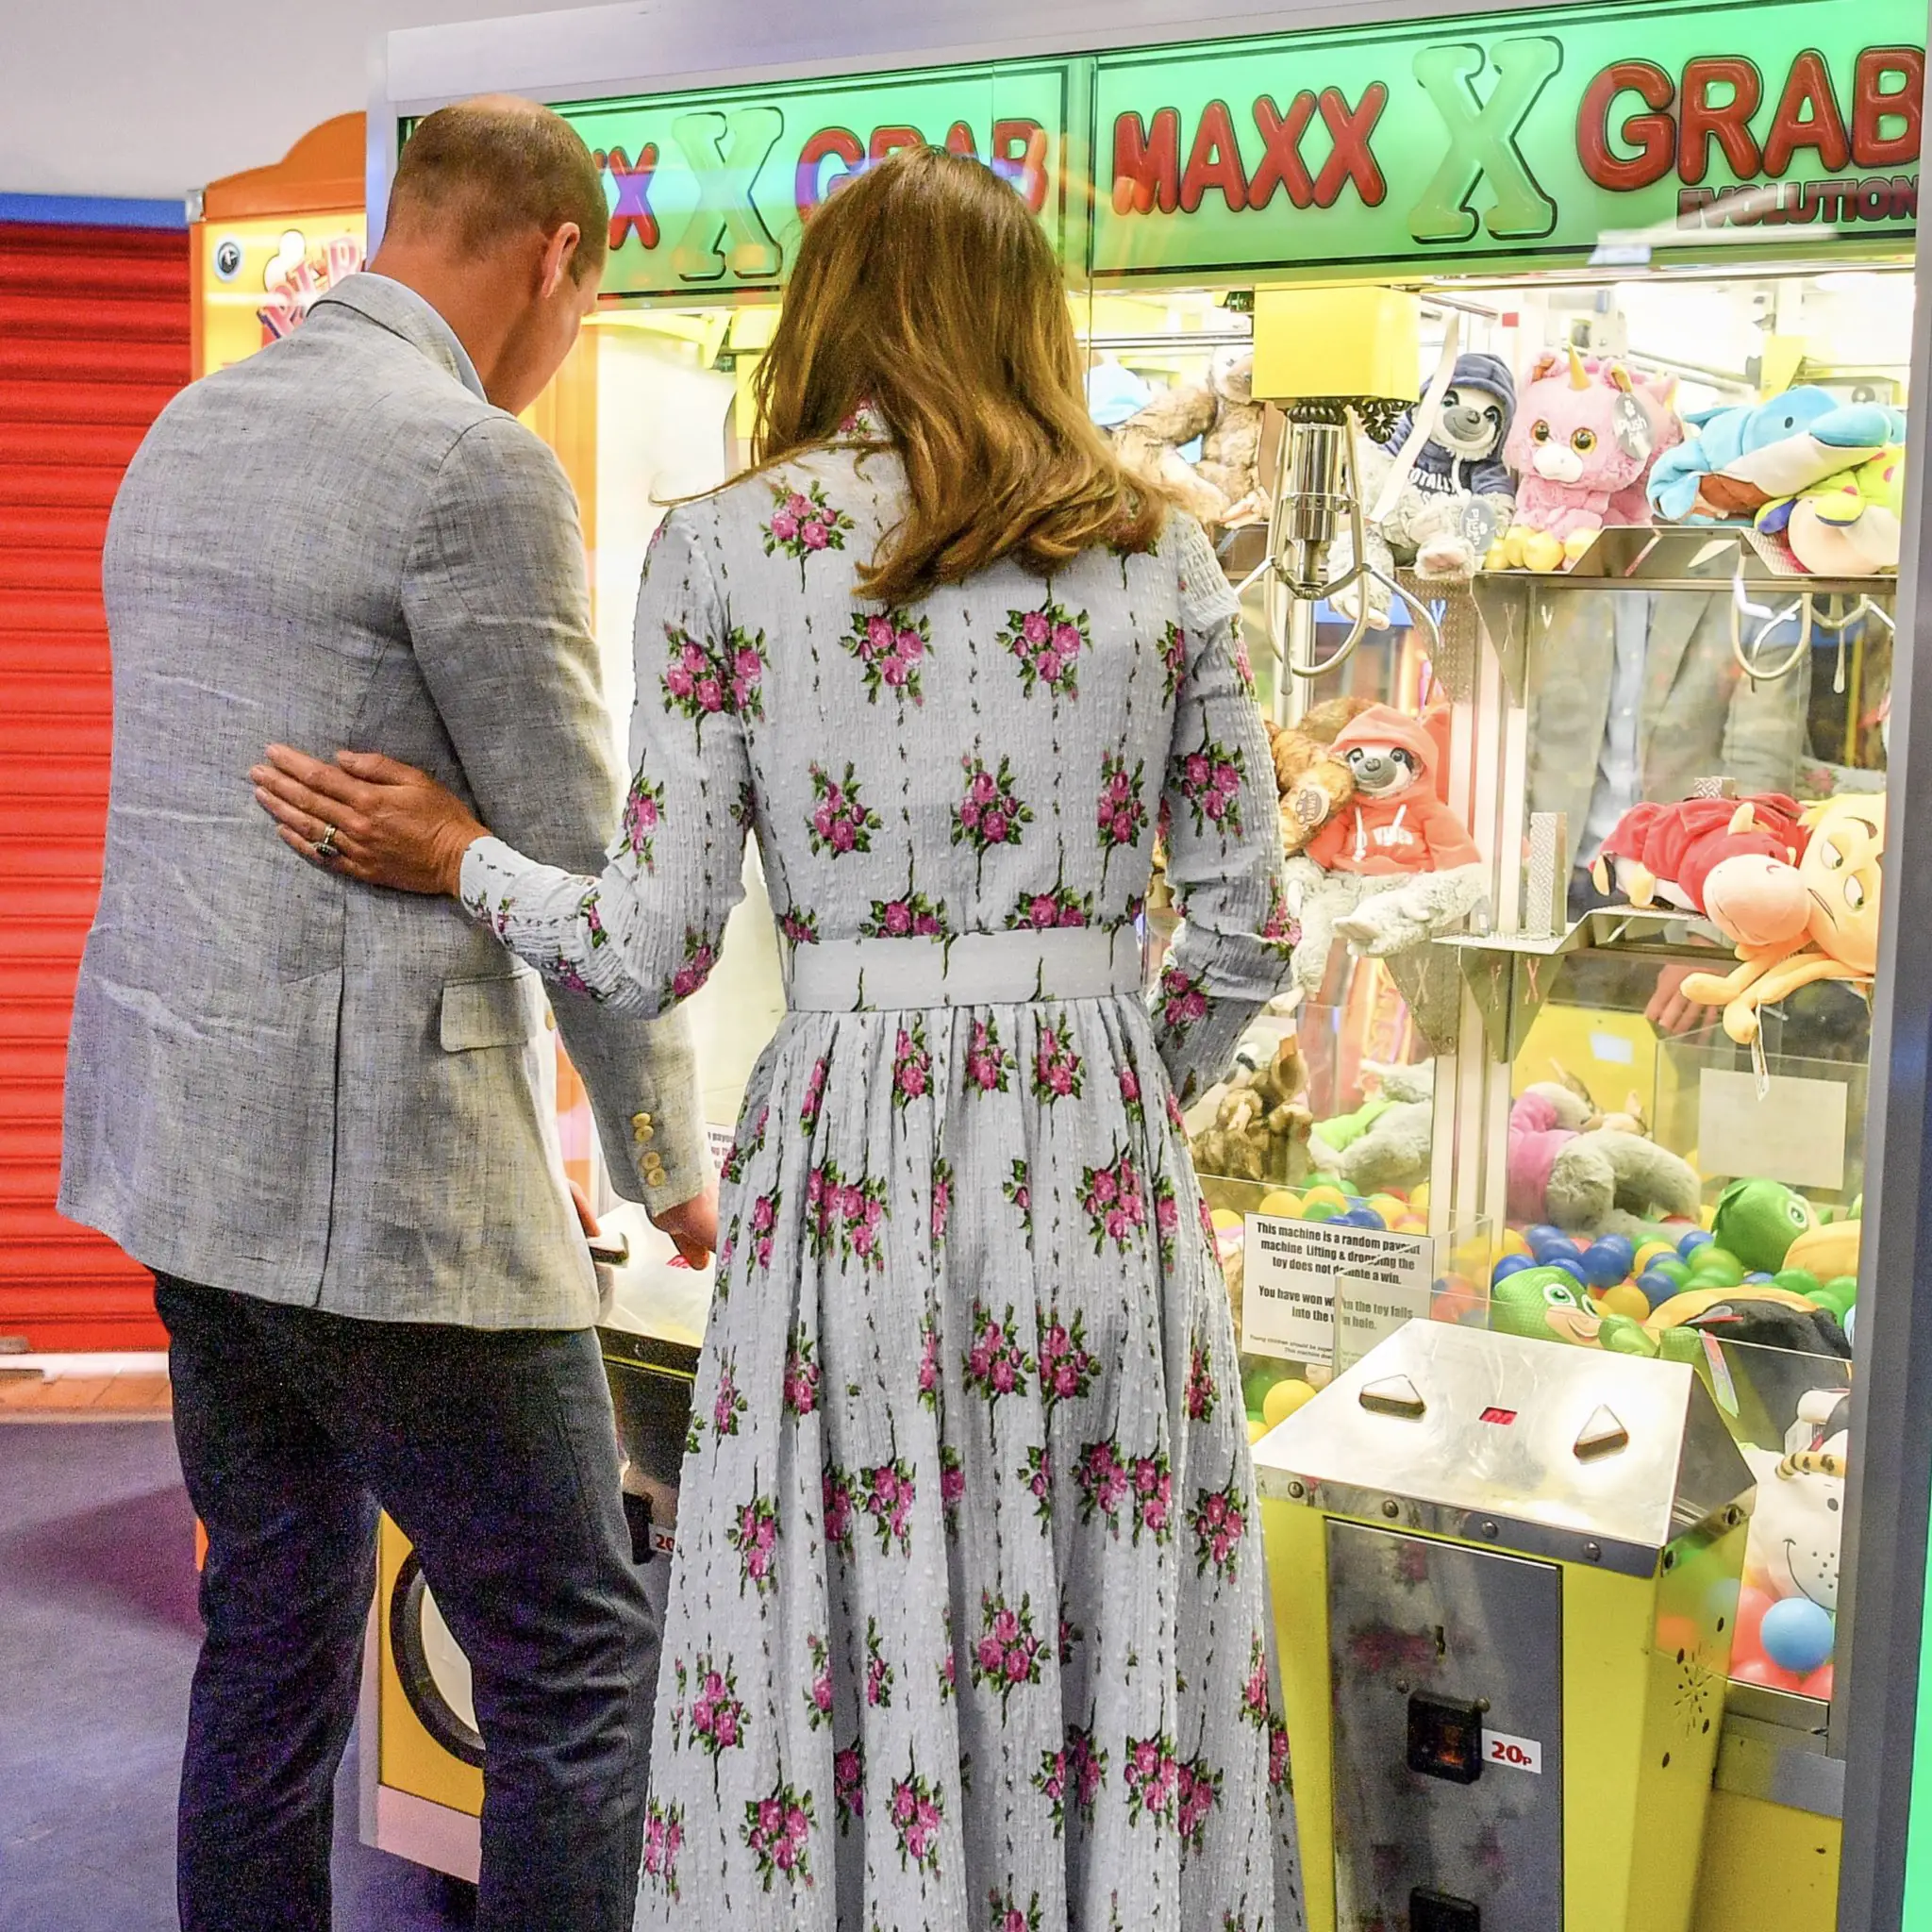 The Duke and Duchess of Cambridge played a game of ball during Barry Island visit